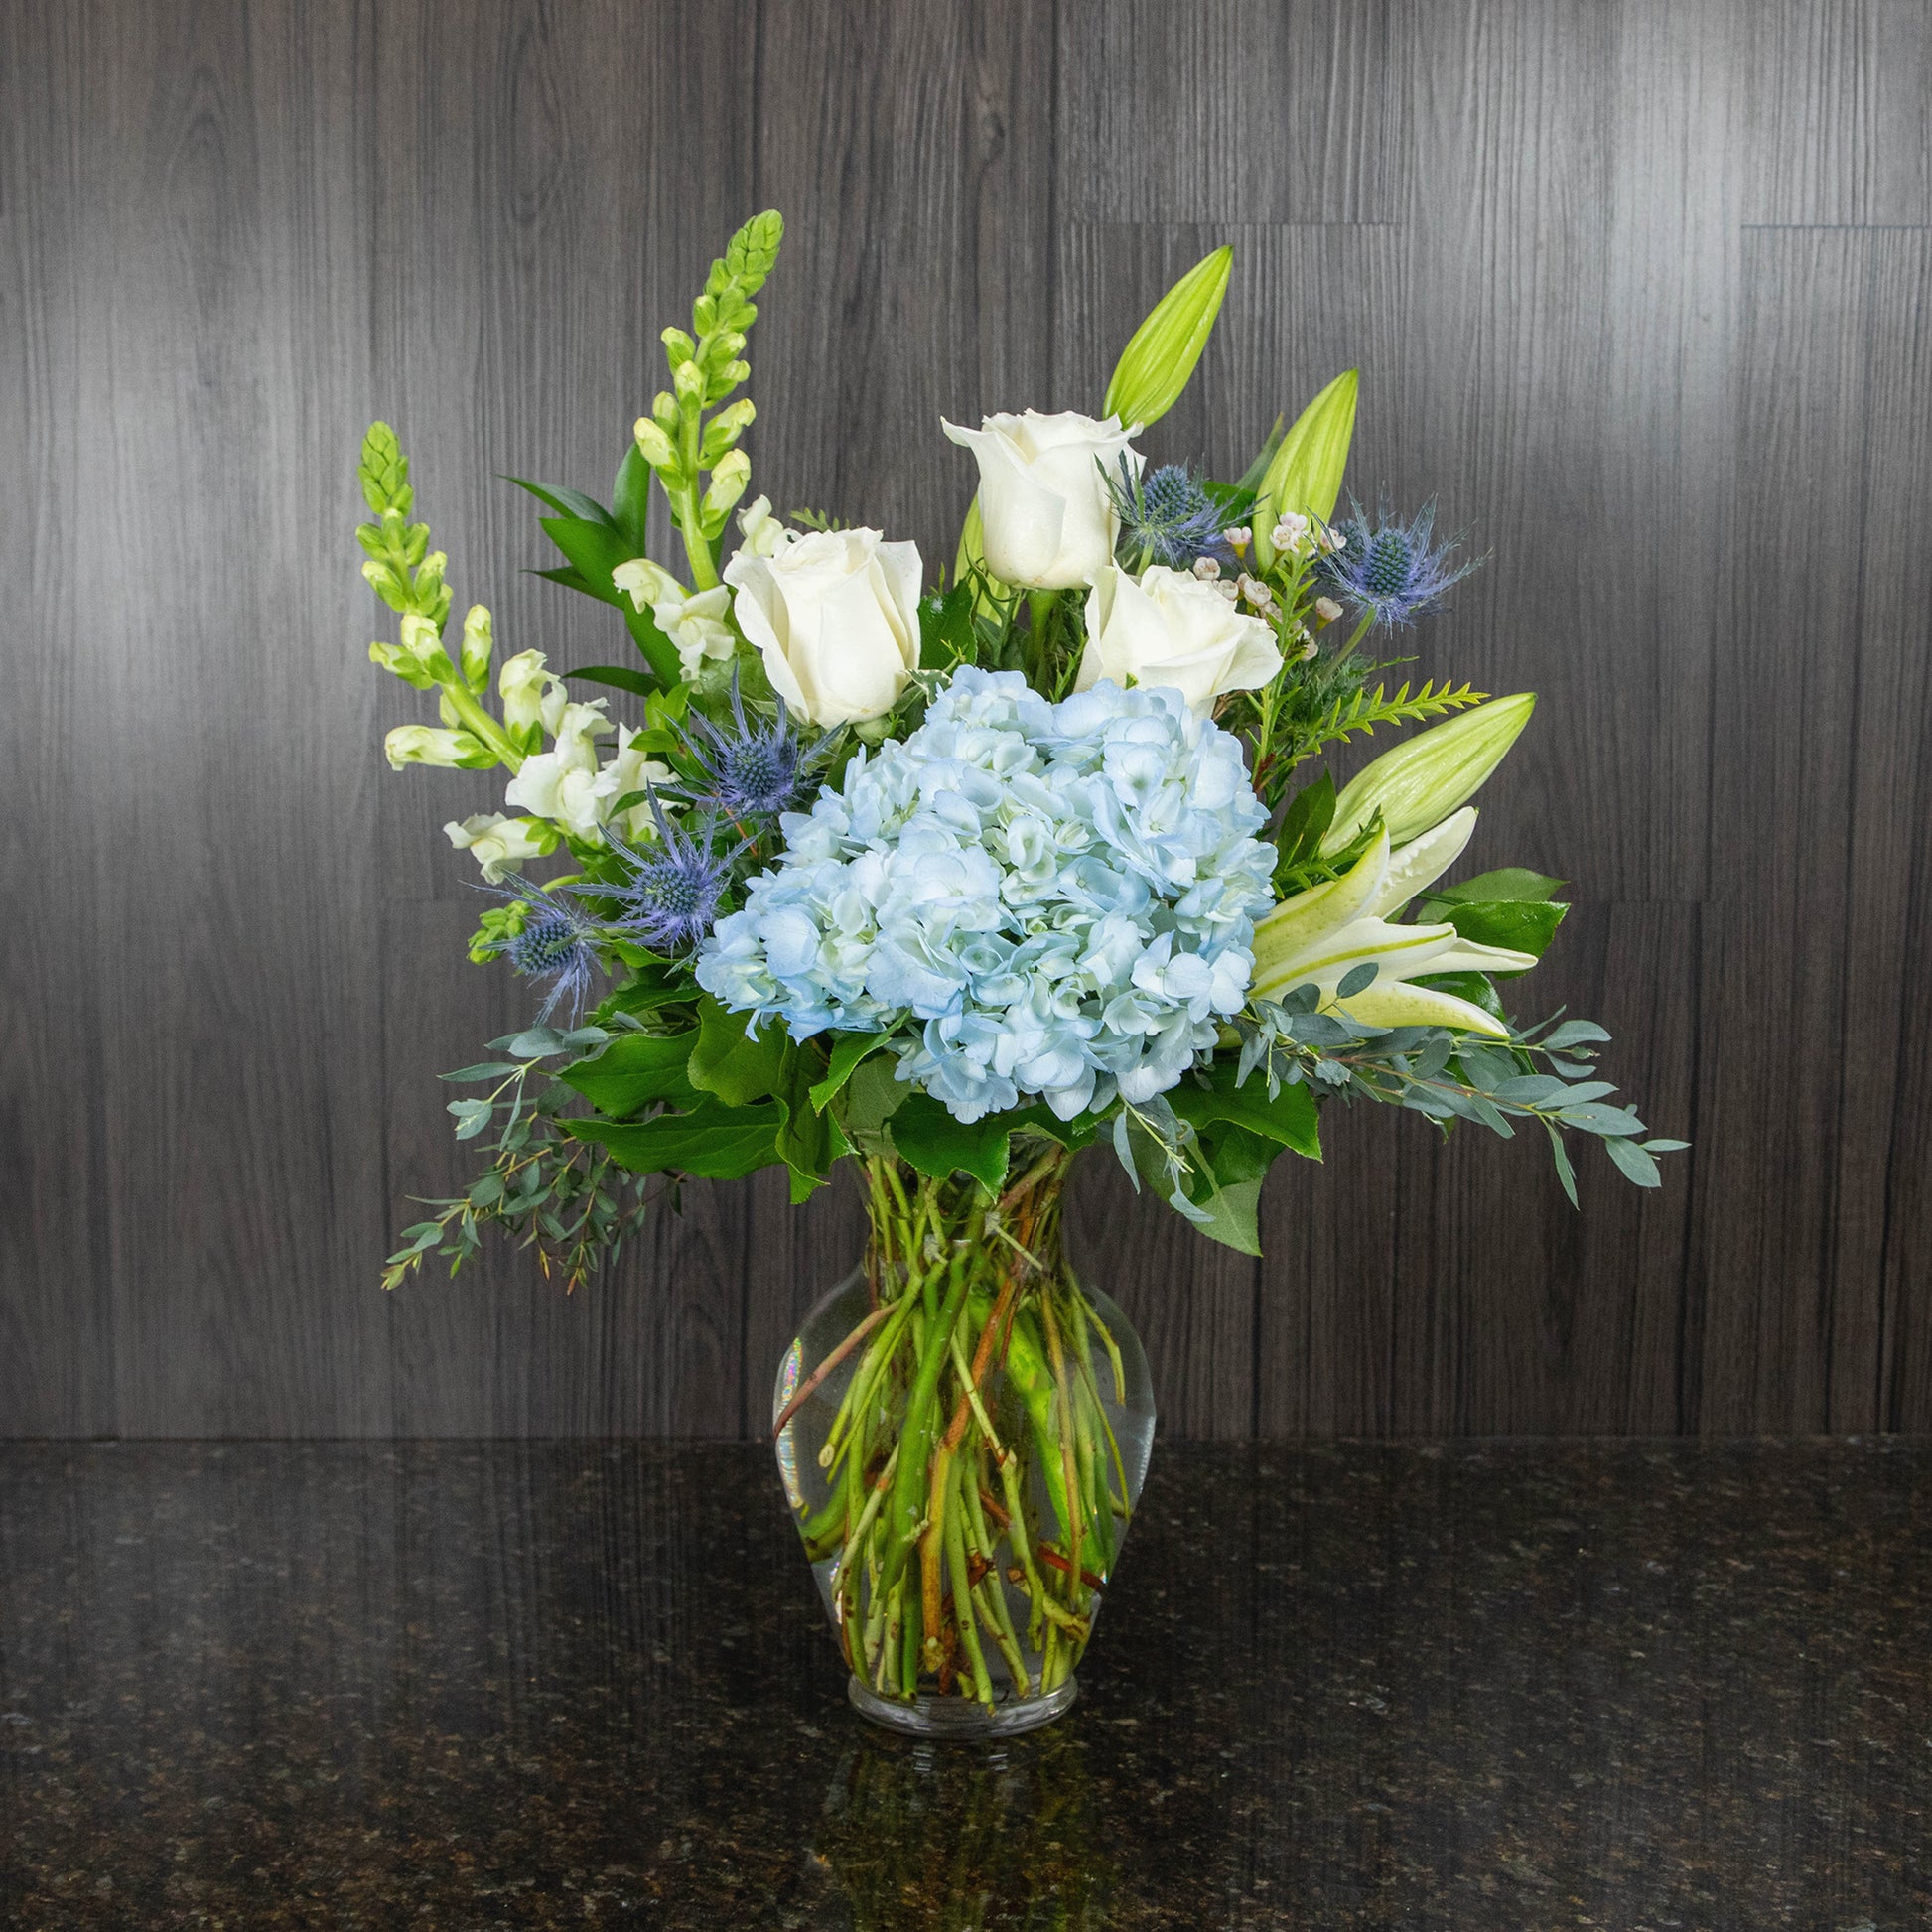 a flower arrangement of white and blue flowers in a glass vase